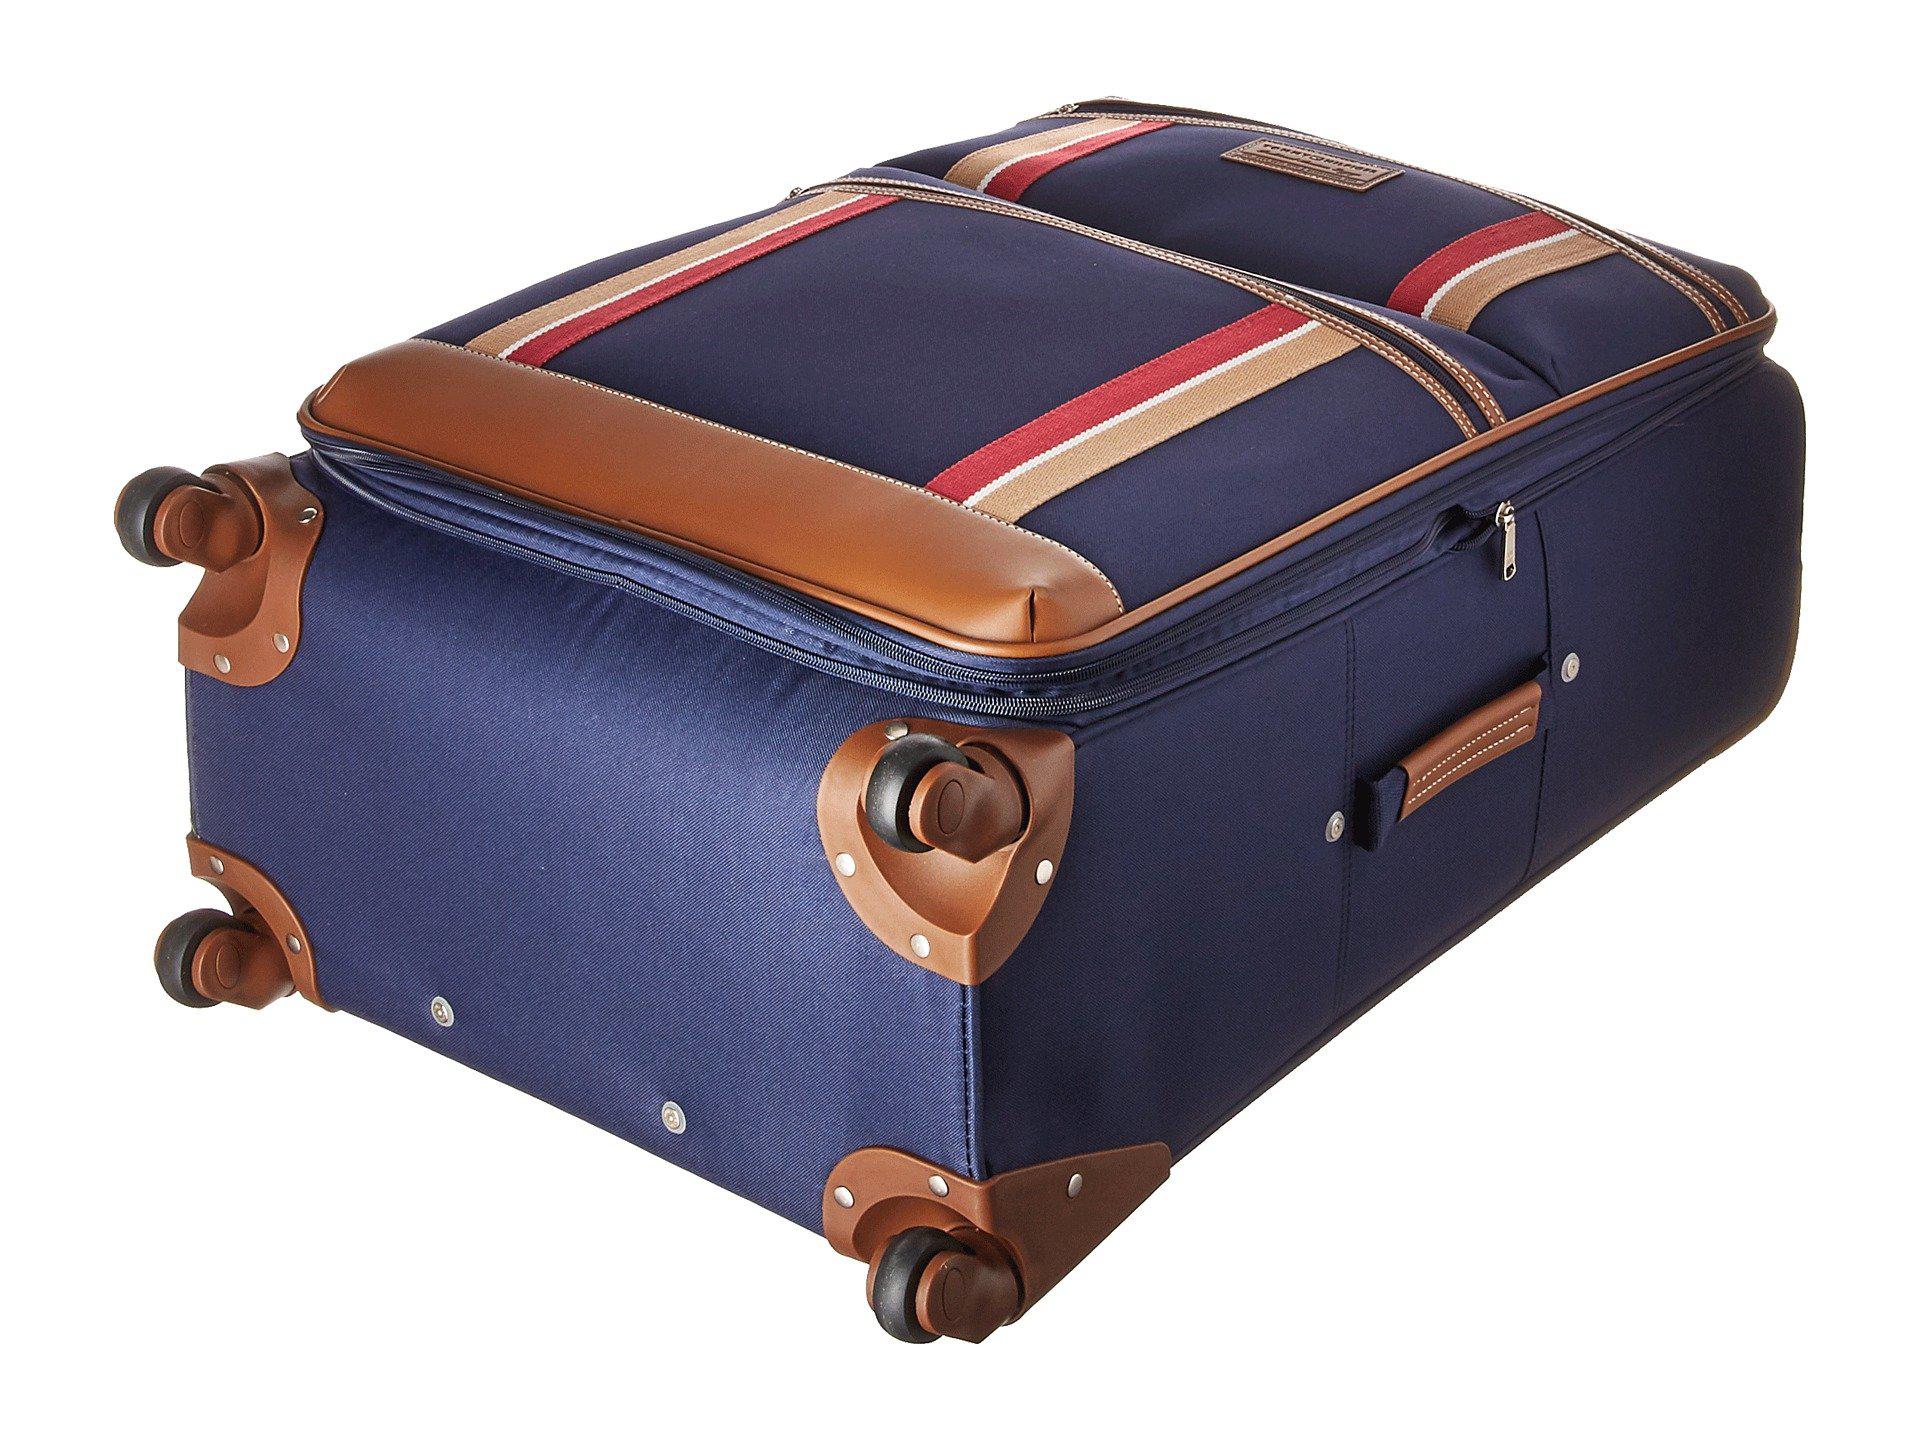 Tommy Hilfiger Scout 4.0 28 Upright Suitcase (navy) Luggage in Blue | Lyst